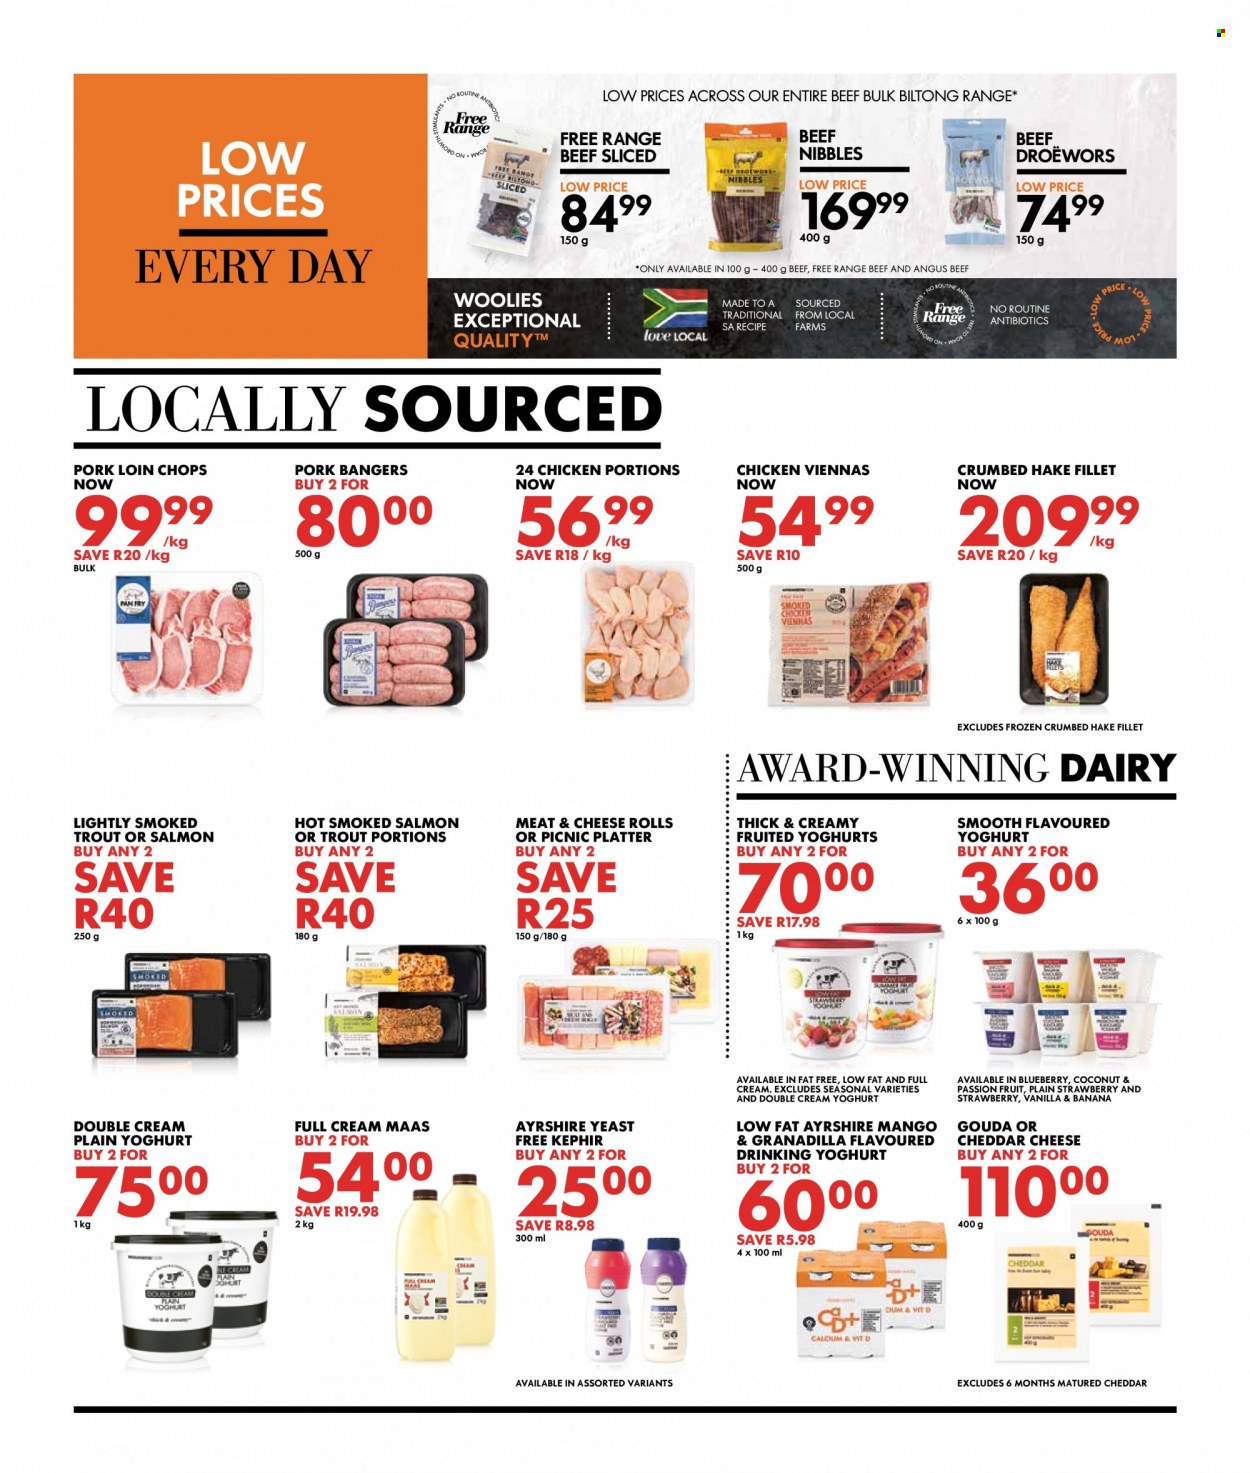 Woolworths specials - 06.20.2022 - 07.03.2022. 